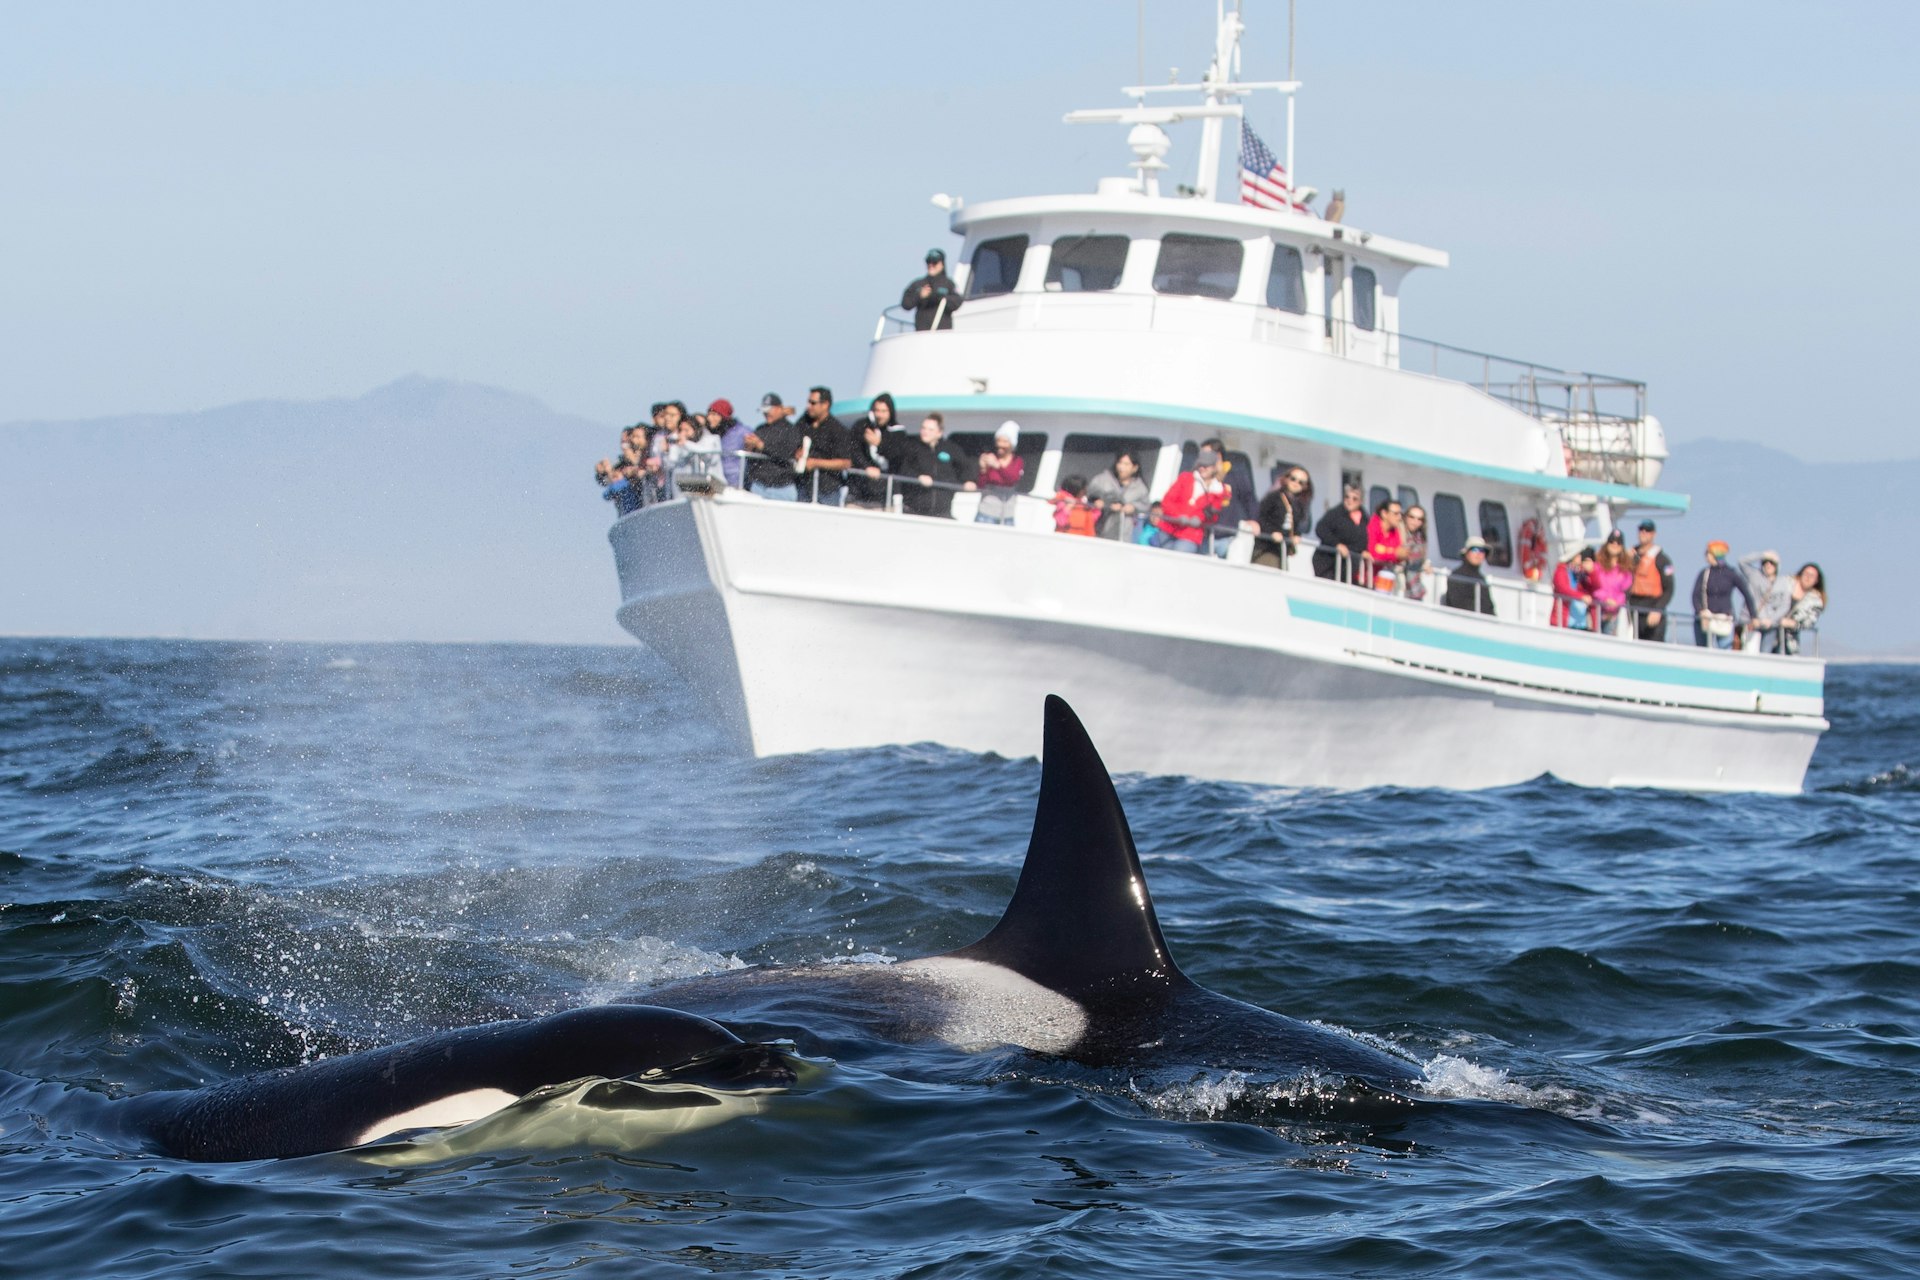 Tour boat behind two killer whales (Orcinus orca).